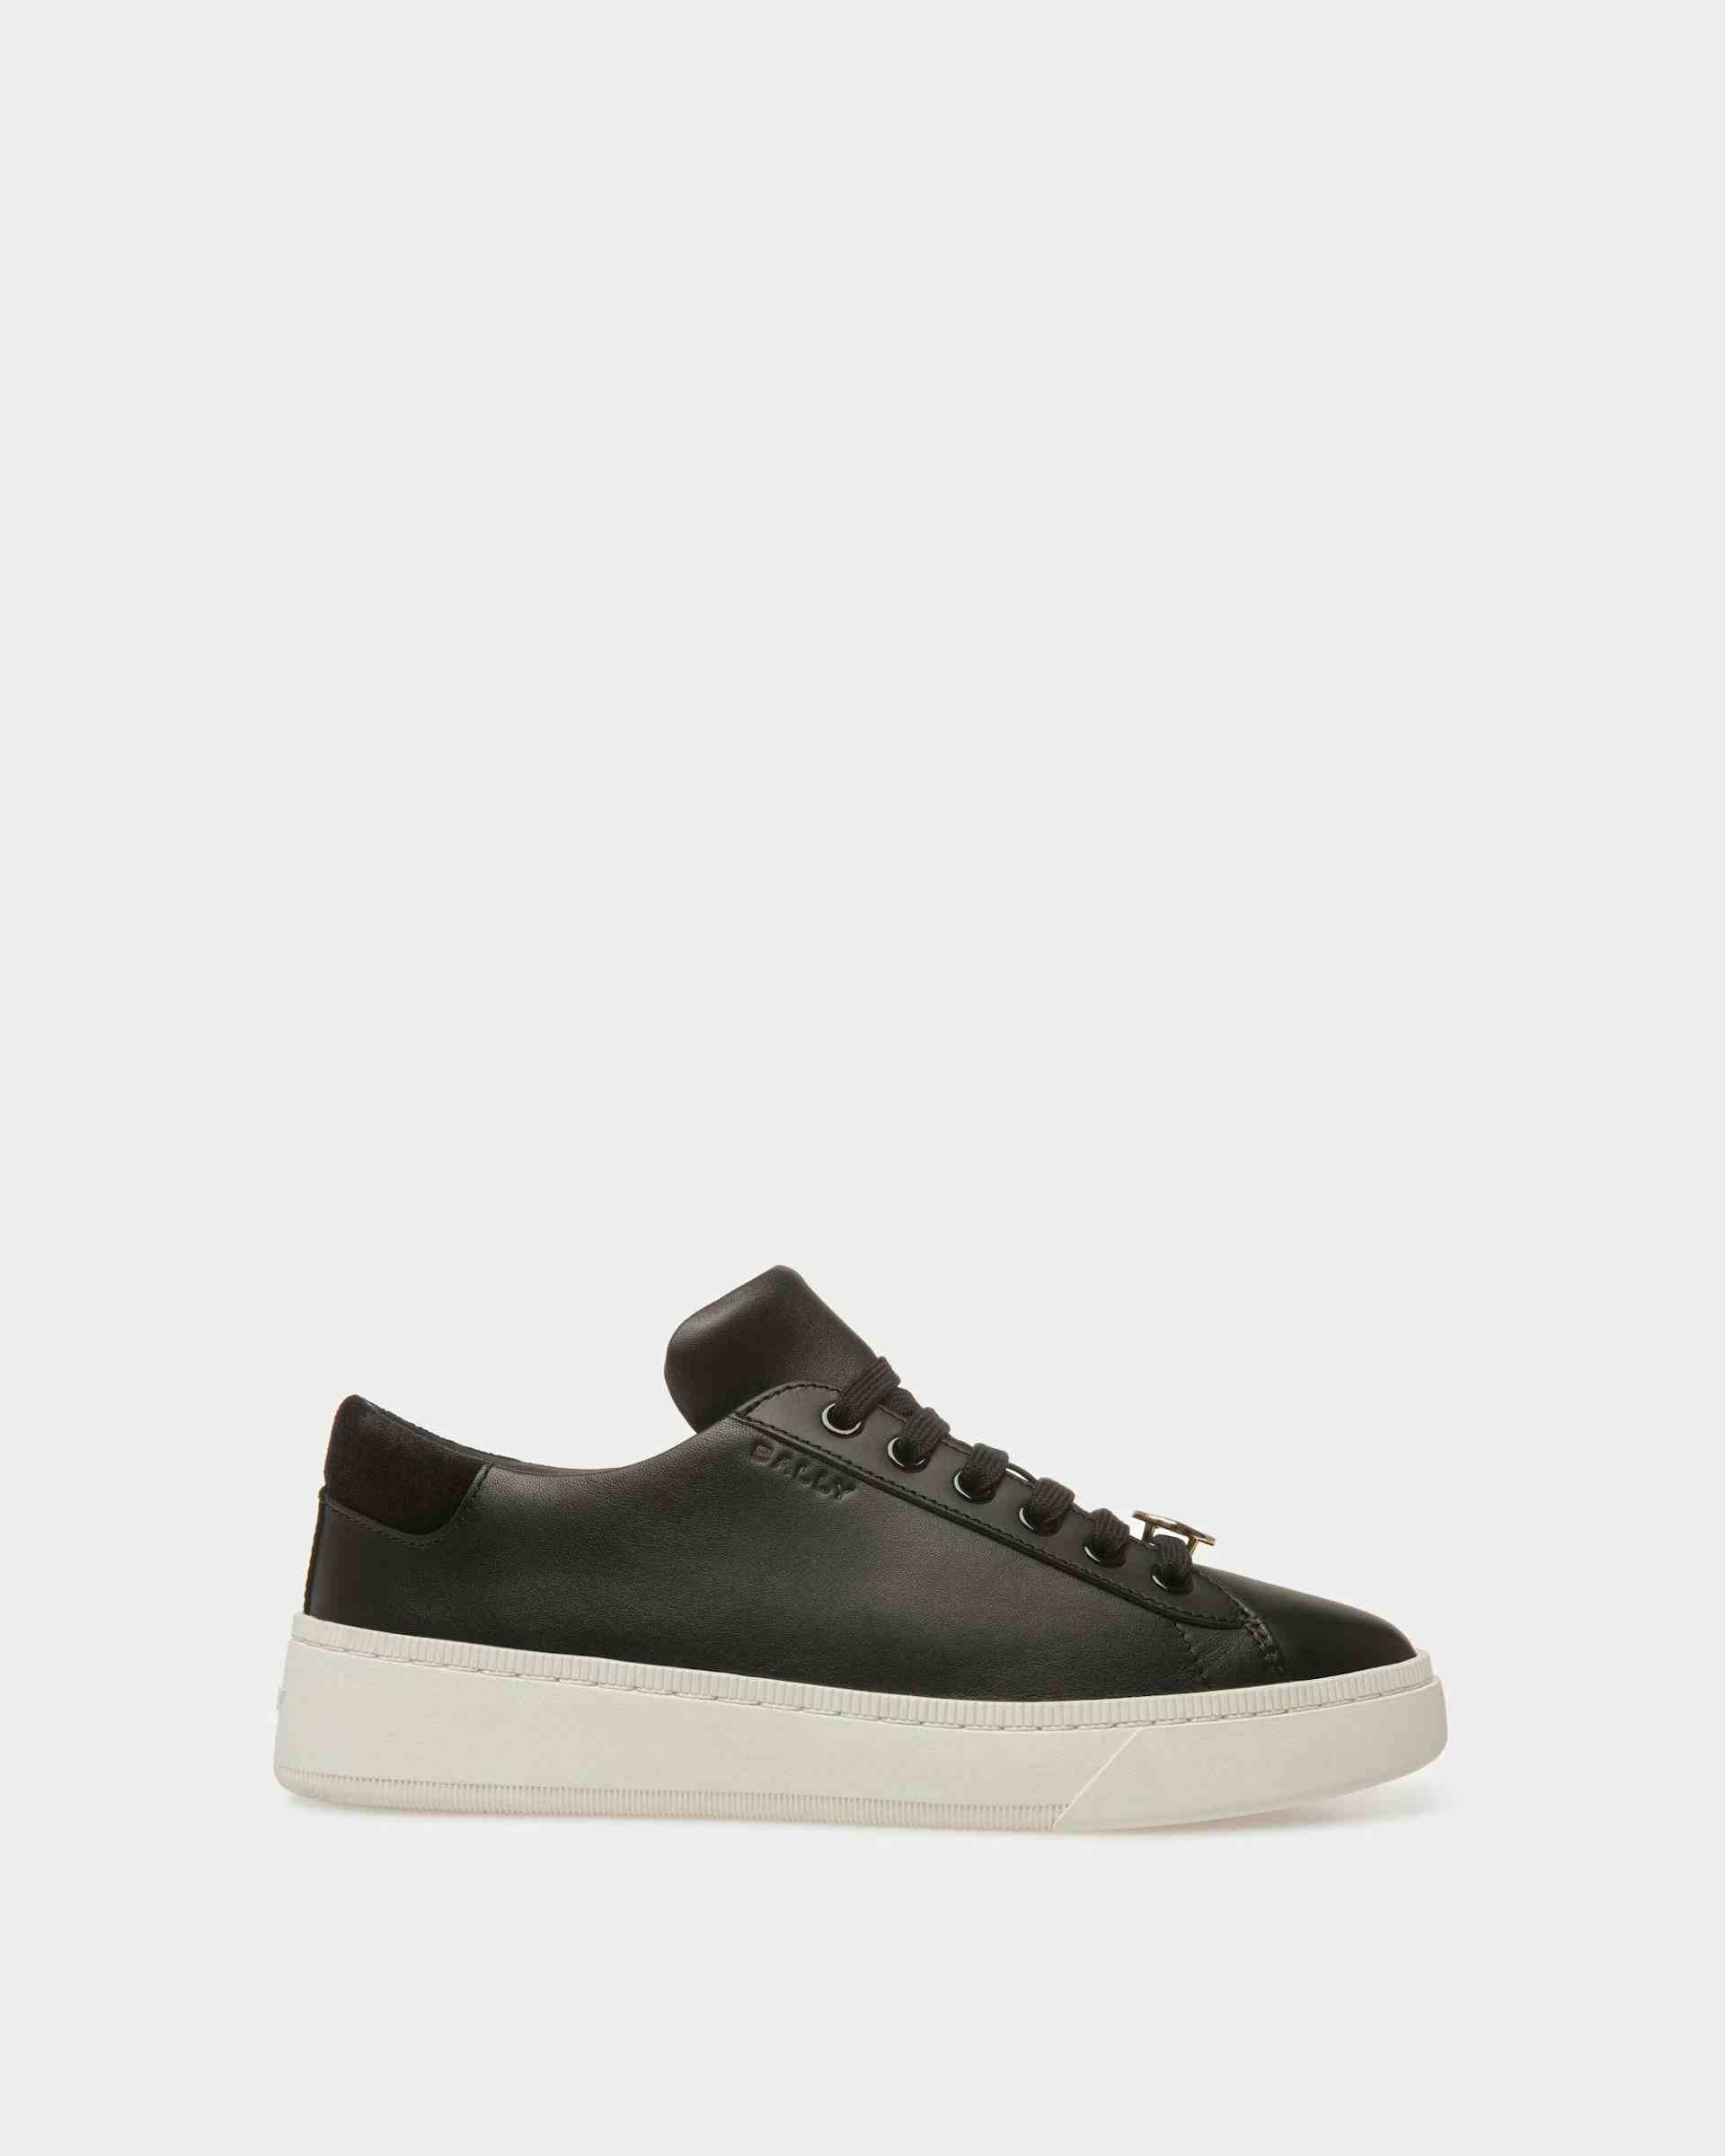 Raise Sneakers In Black And White Leather - Women's - Bally